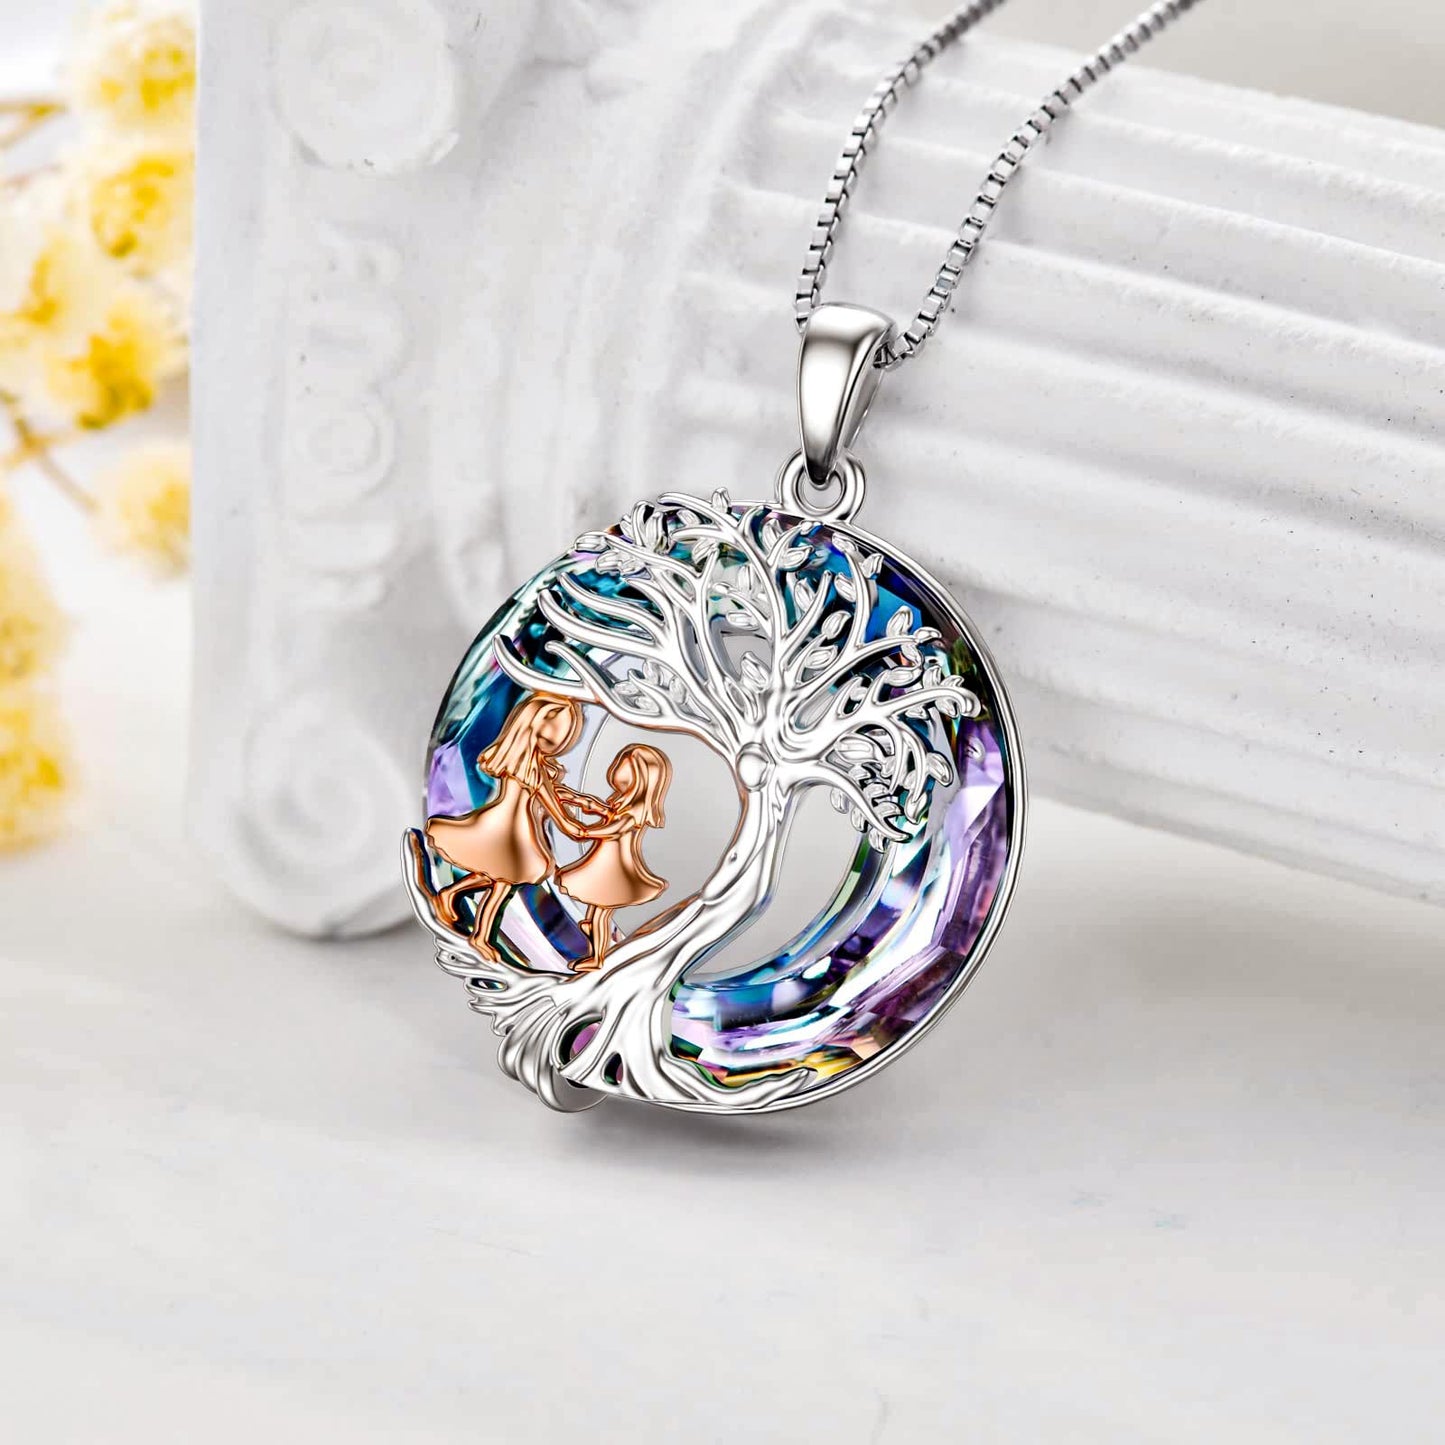 S925 Always Be with You Crystal Life Tree Necklace